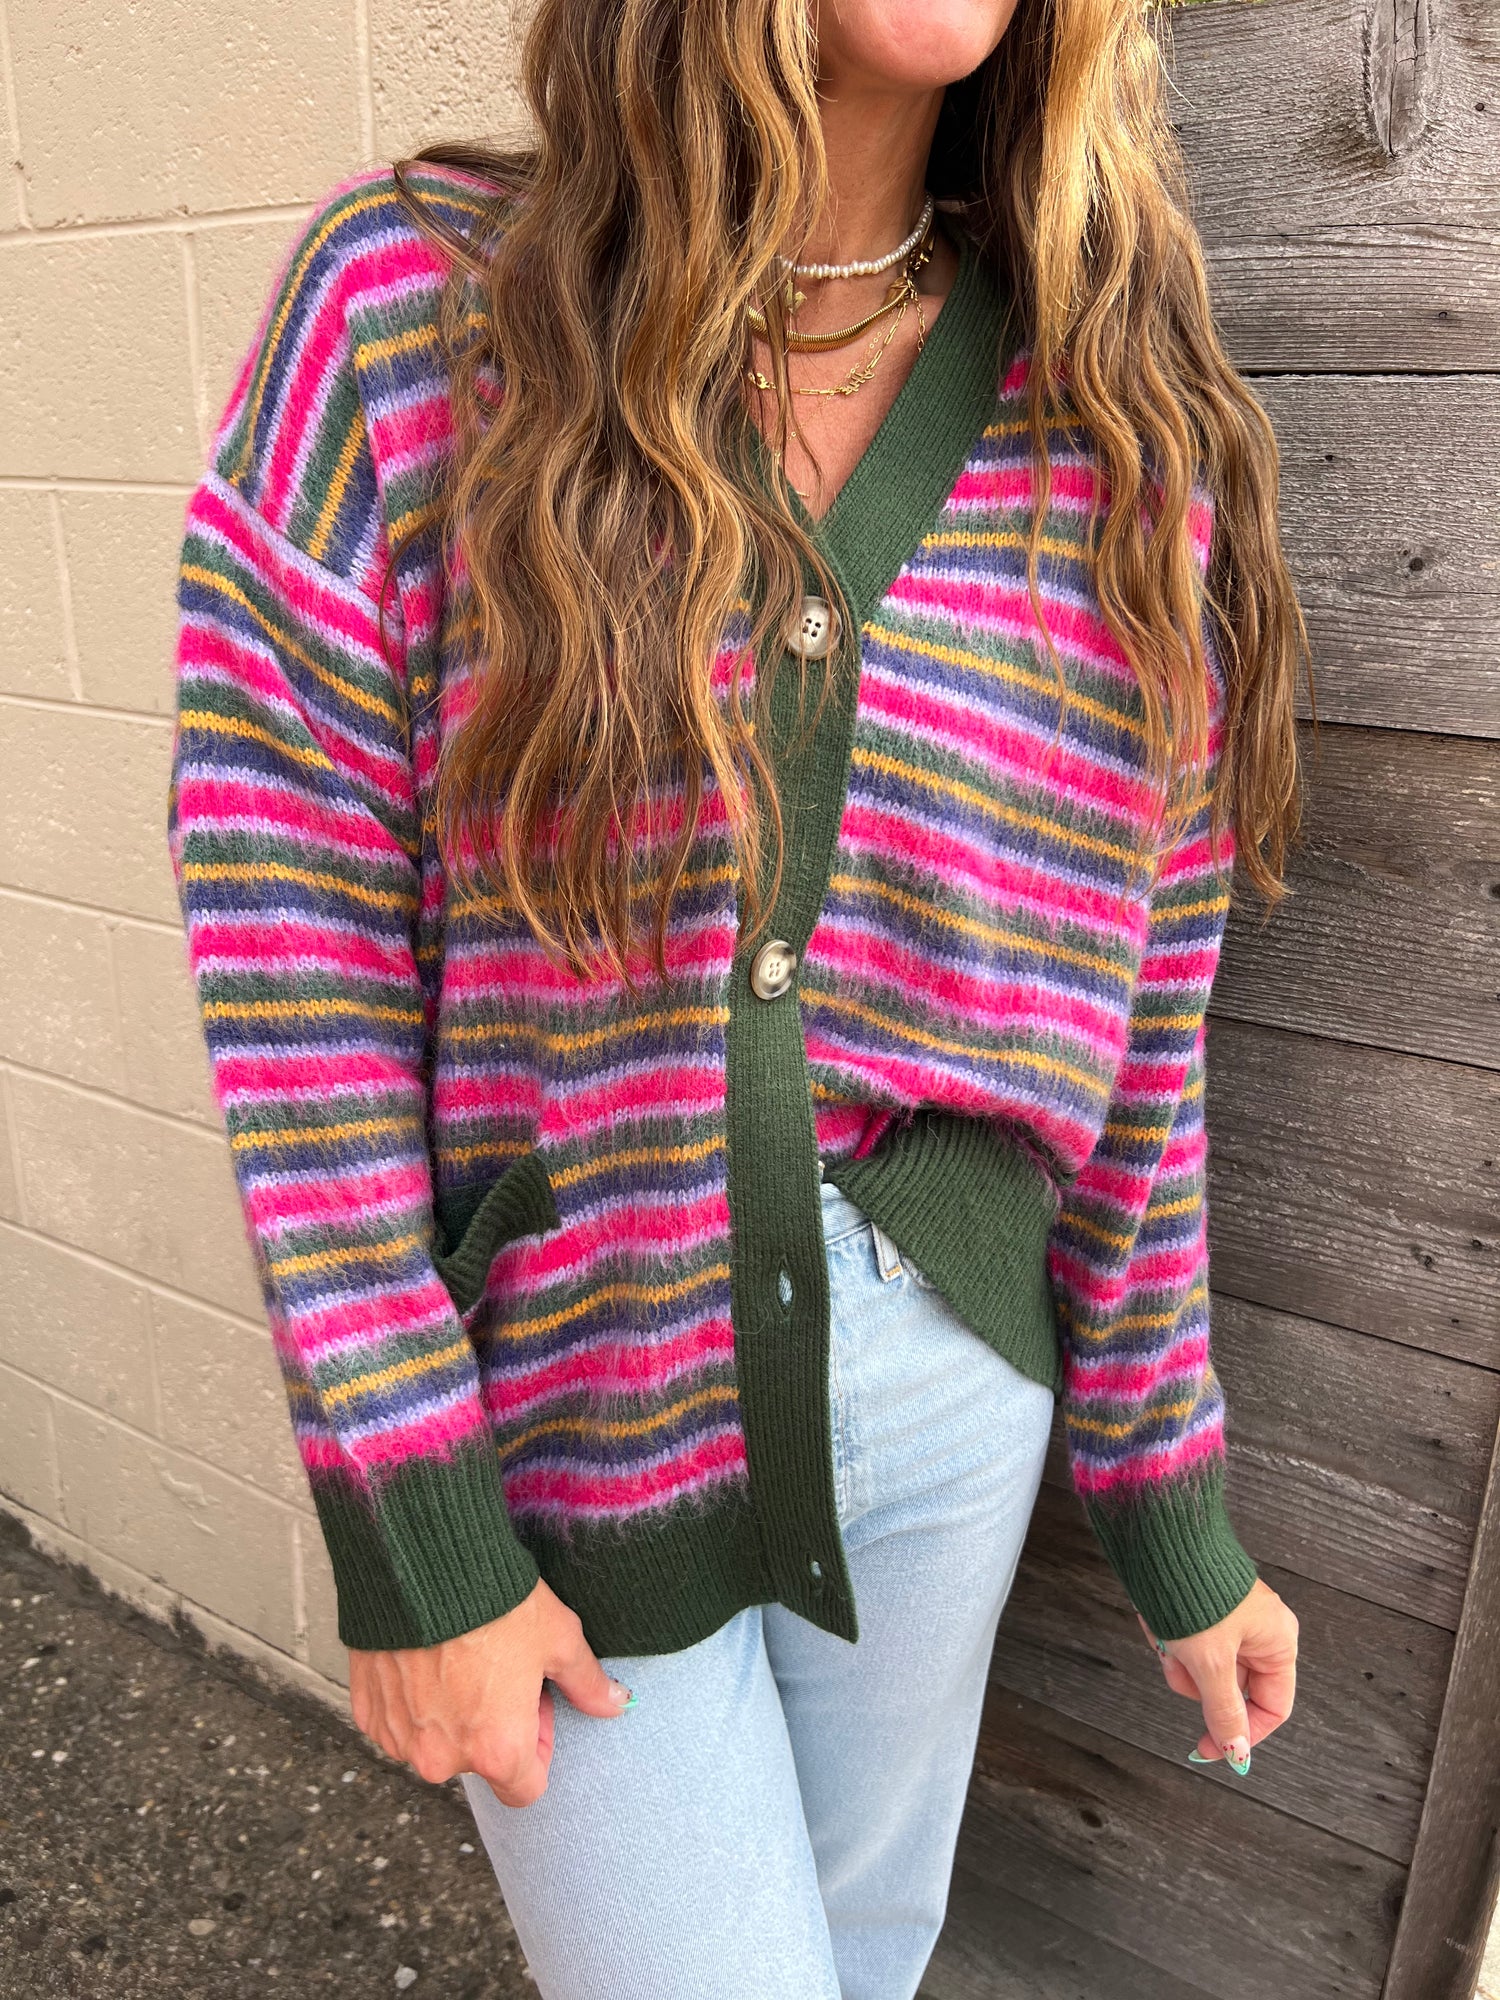 DAYDREAMER PINK AND GREEN STRIPE CARDIGAN - THE HIP EAGLE BOUTIQUE